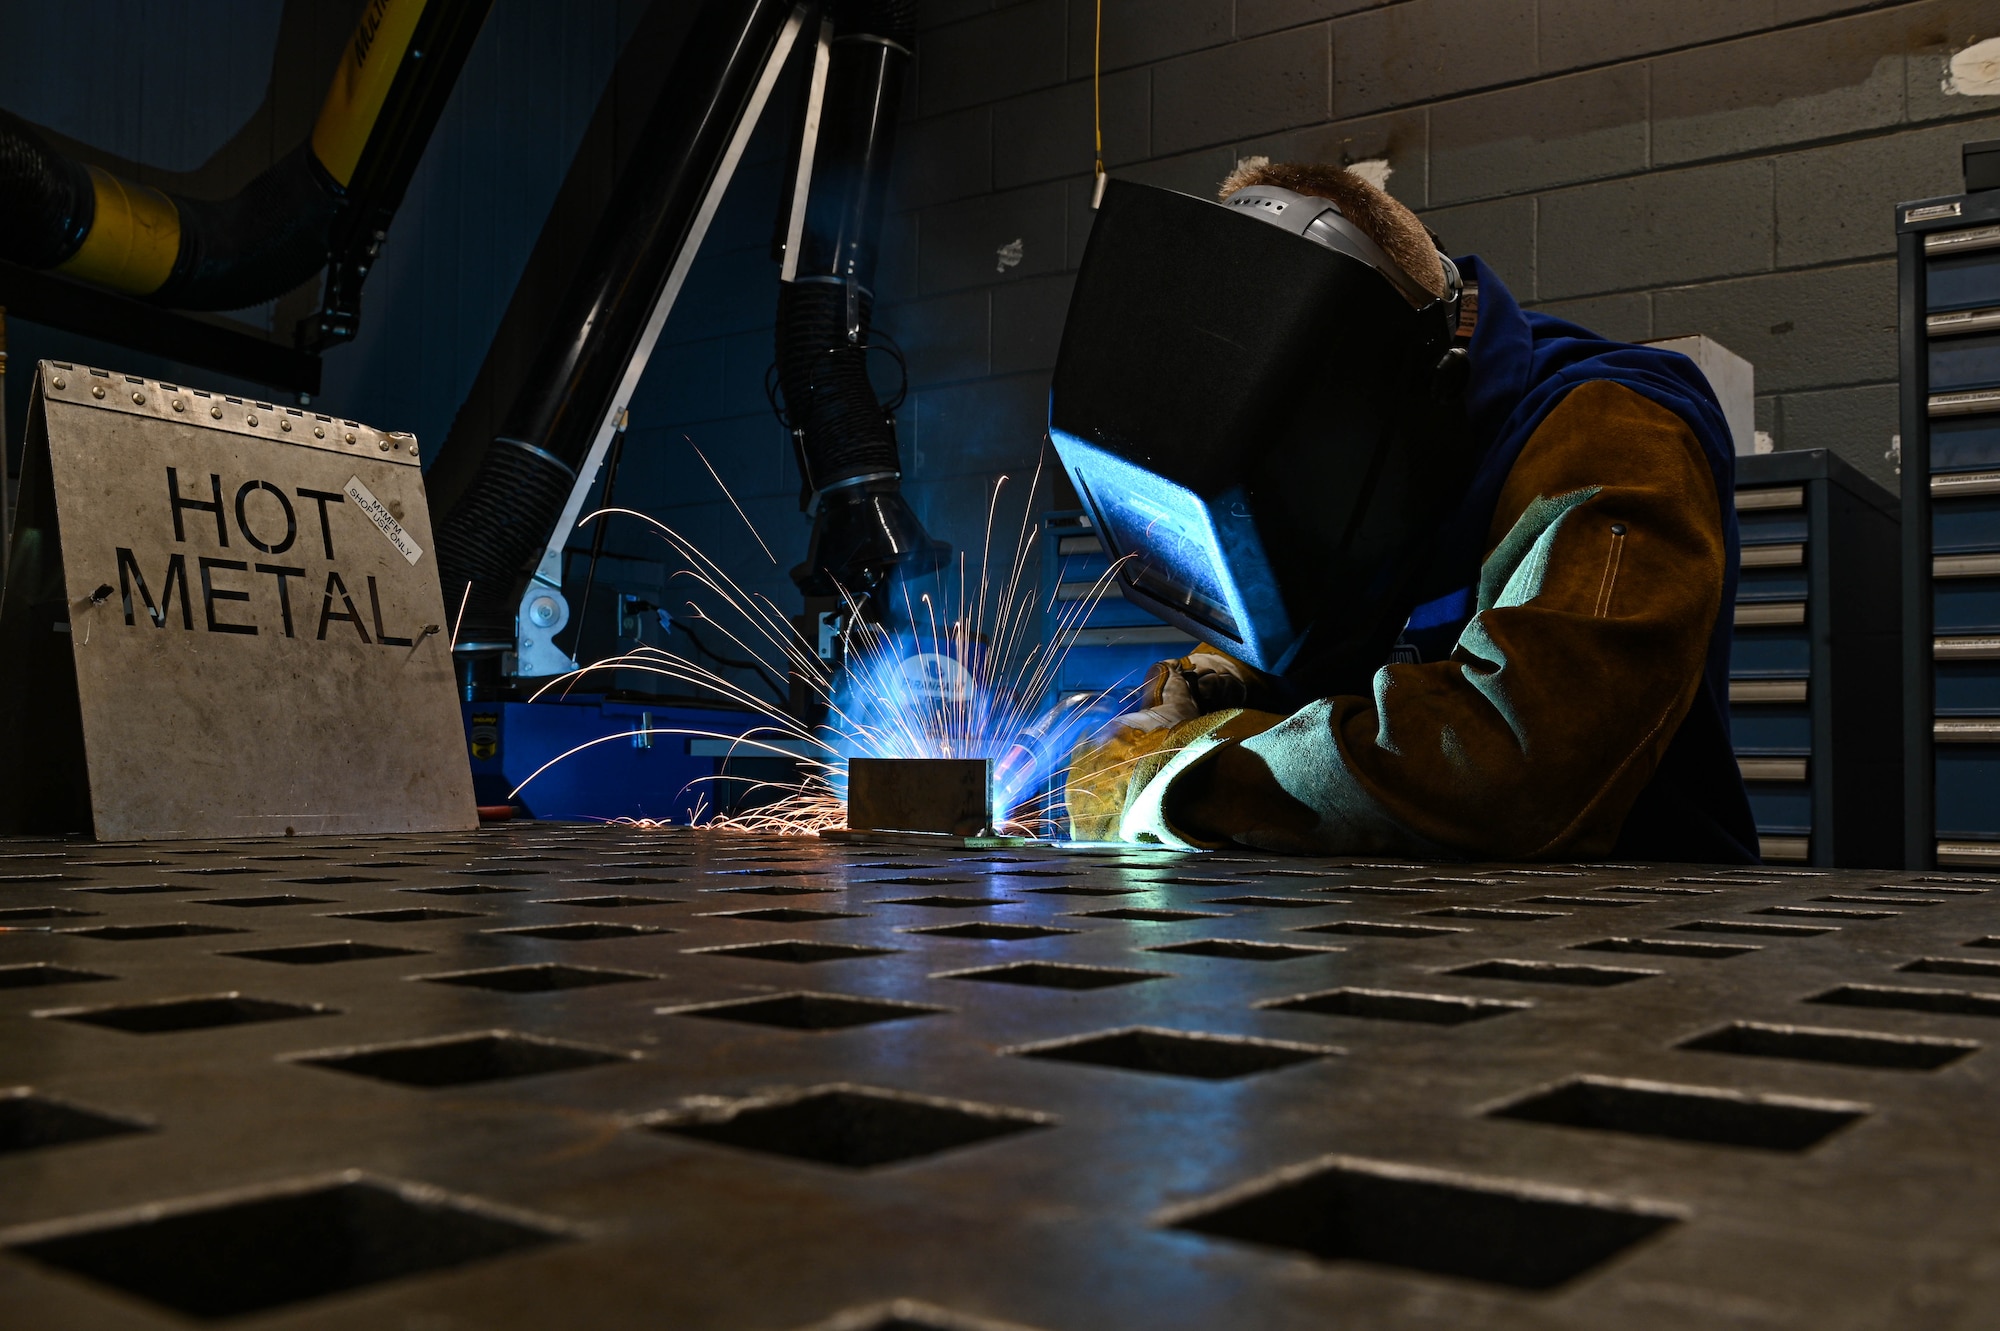 U.S. Air Force Senior Airman Cameron Balon, 23rd Maintenance Squadron aircraft metals technician, welds pieces of metal together at Moody Air Force Base, Georgia, Dec. 13, 2022. Airmen are required to be weld certified and recertify every five years with various techniques. (U.S. Air Force photo by Senior Airman Rebeckah Medeiros)